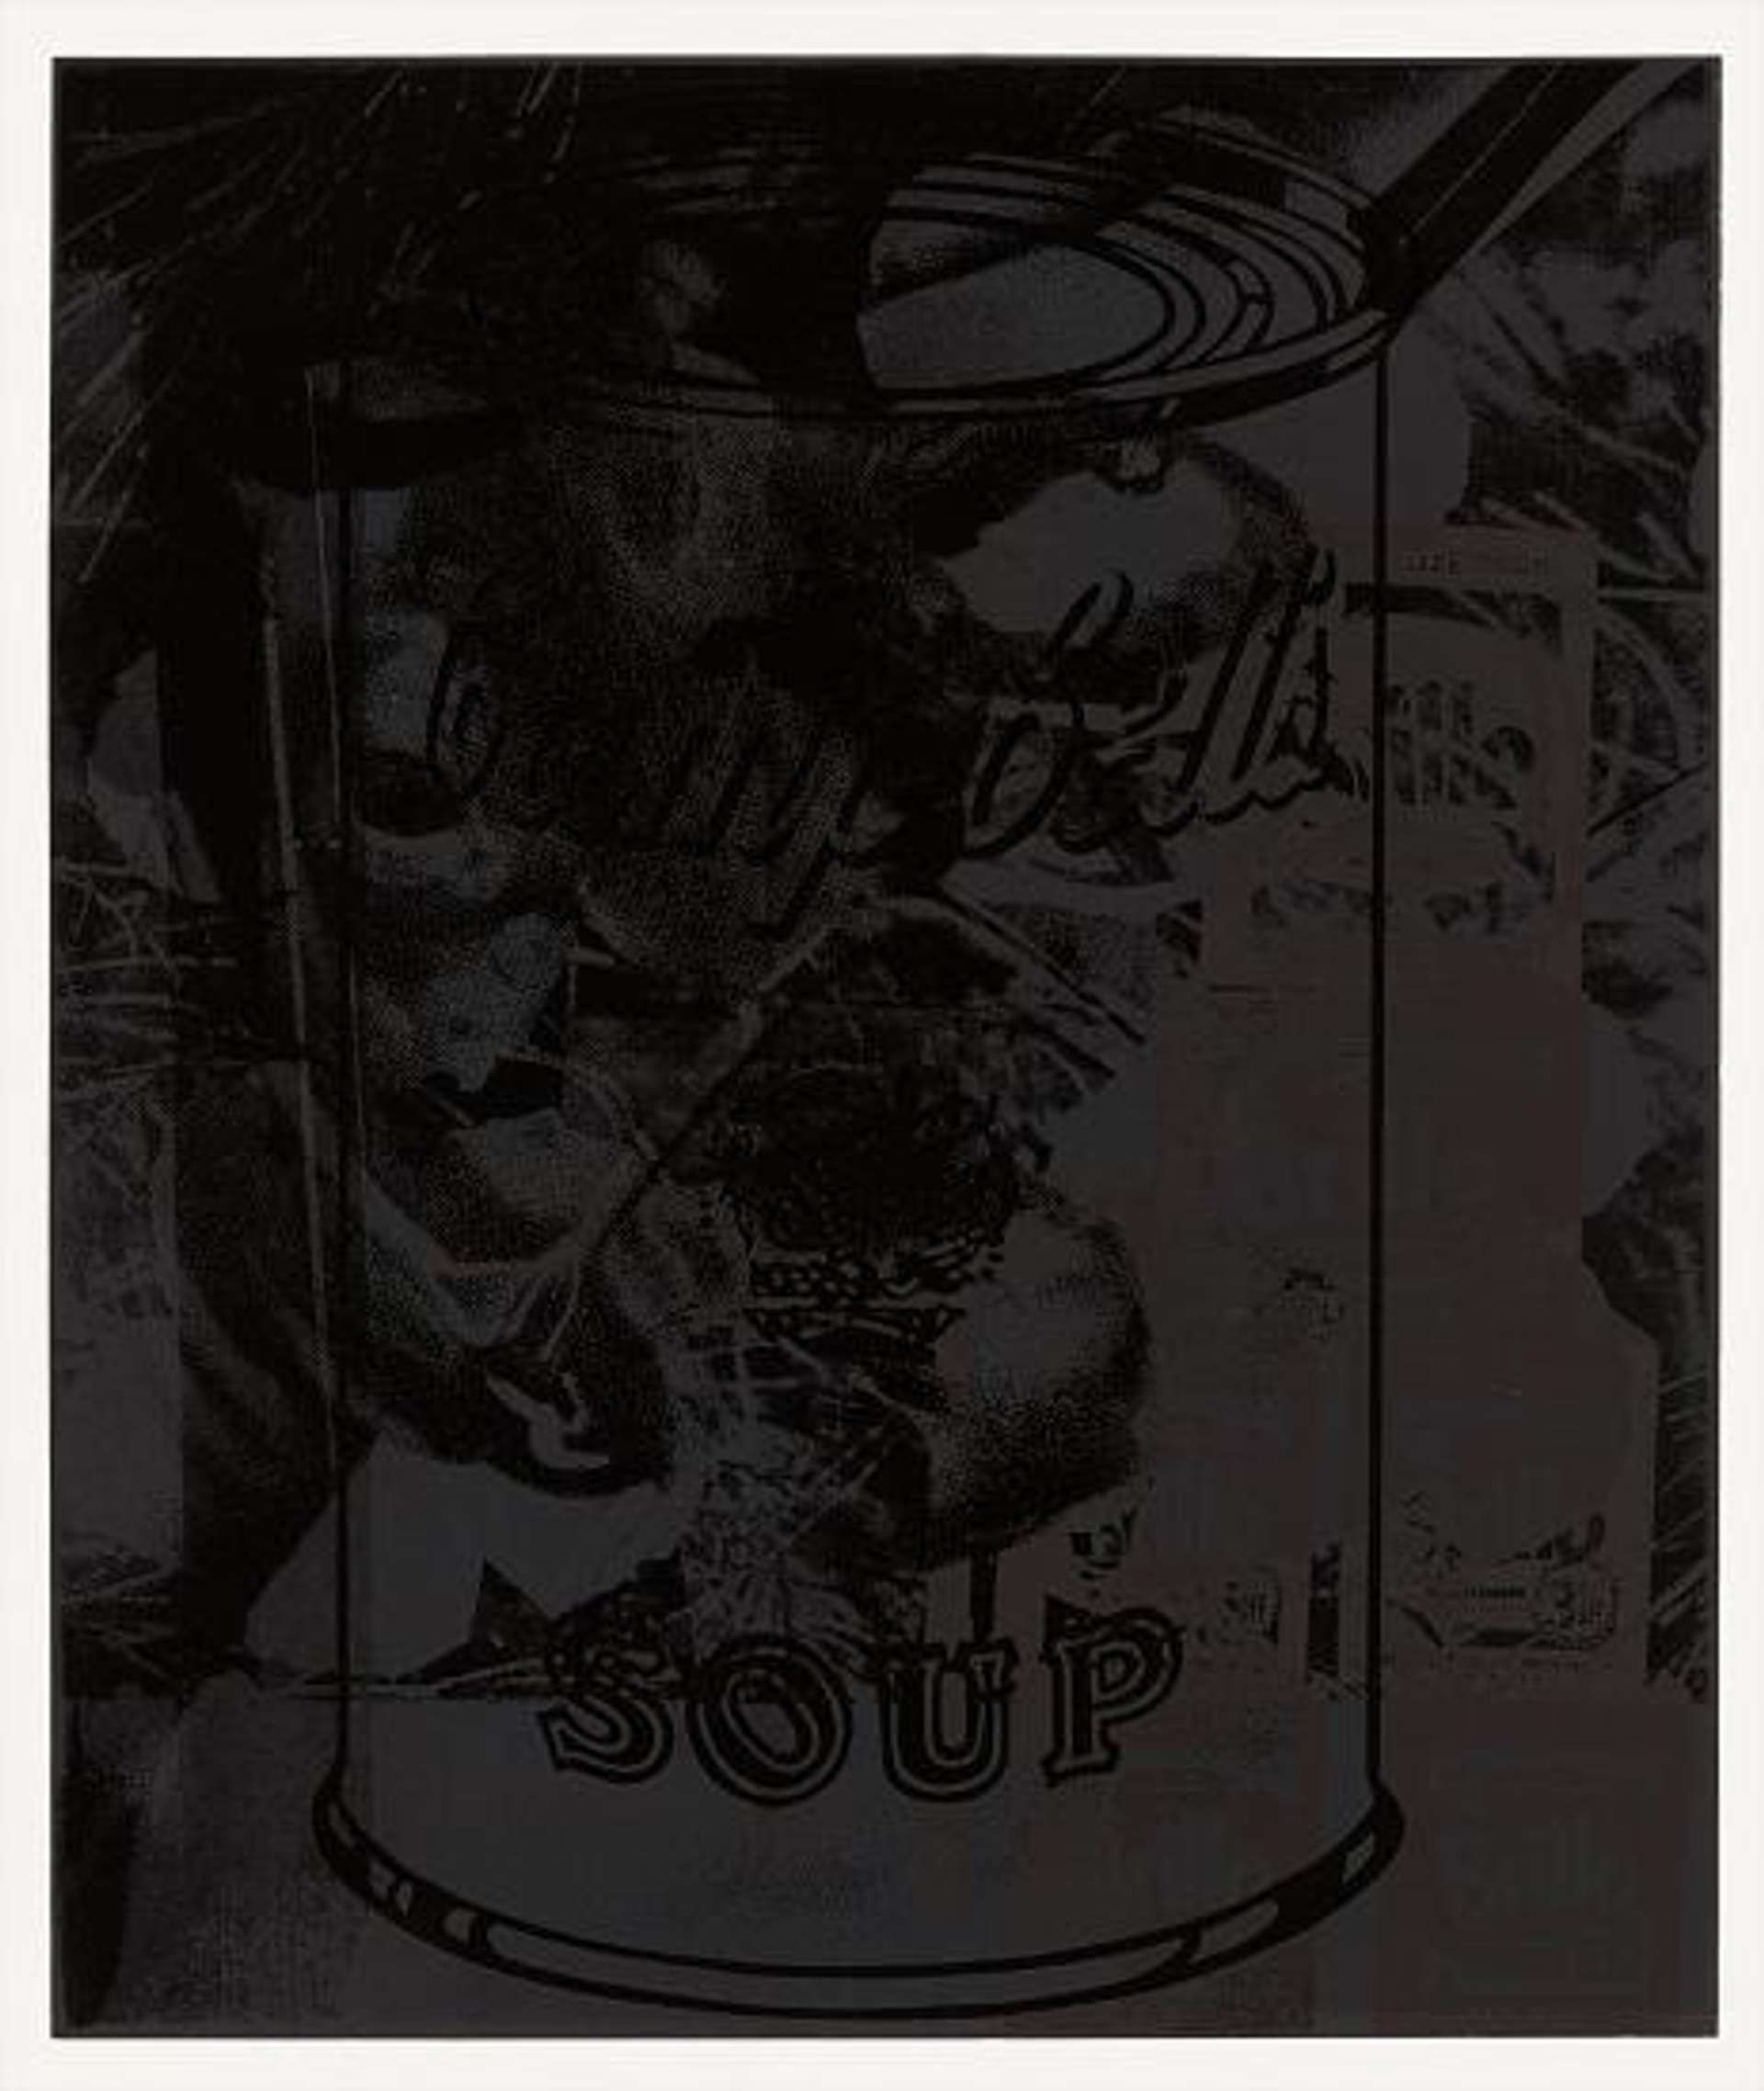 A screenprint by Andy Warhol in black ink depicting the outline of one of his iconic Campbell's soup cans.